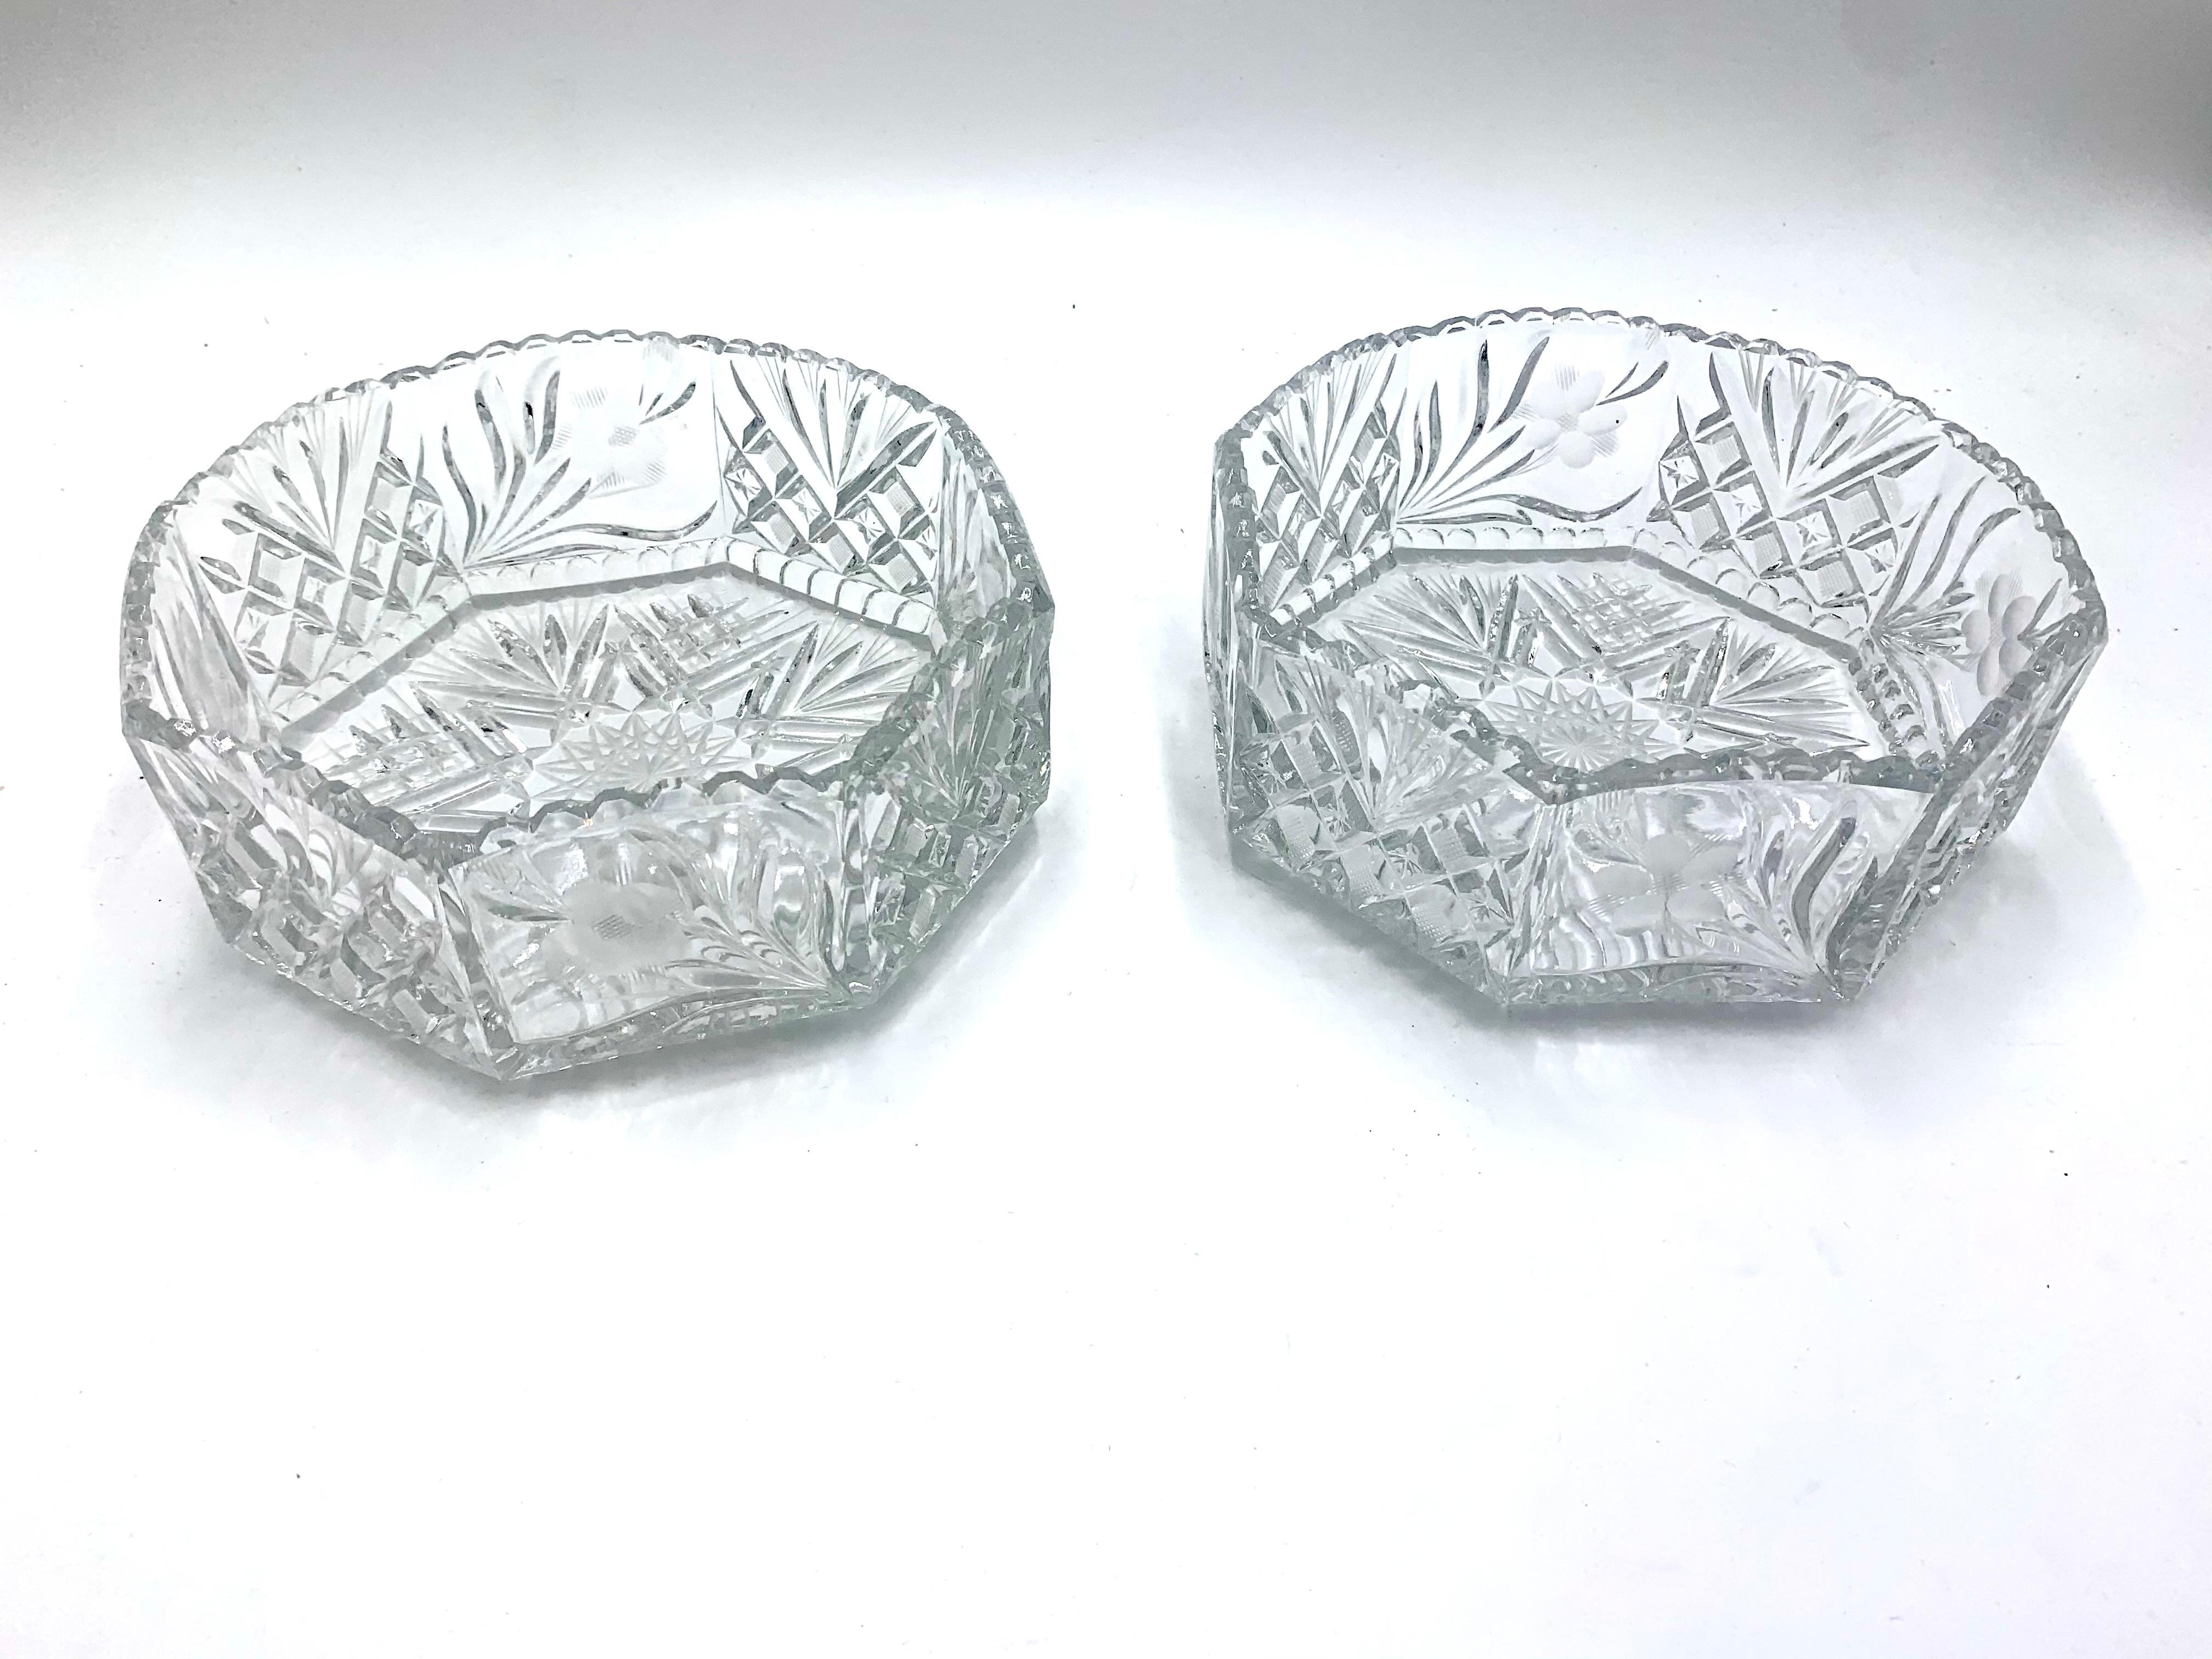 Polish Two Crystal Octagonal Decorative Bowls, Poland, 1950s For Sale